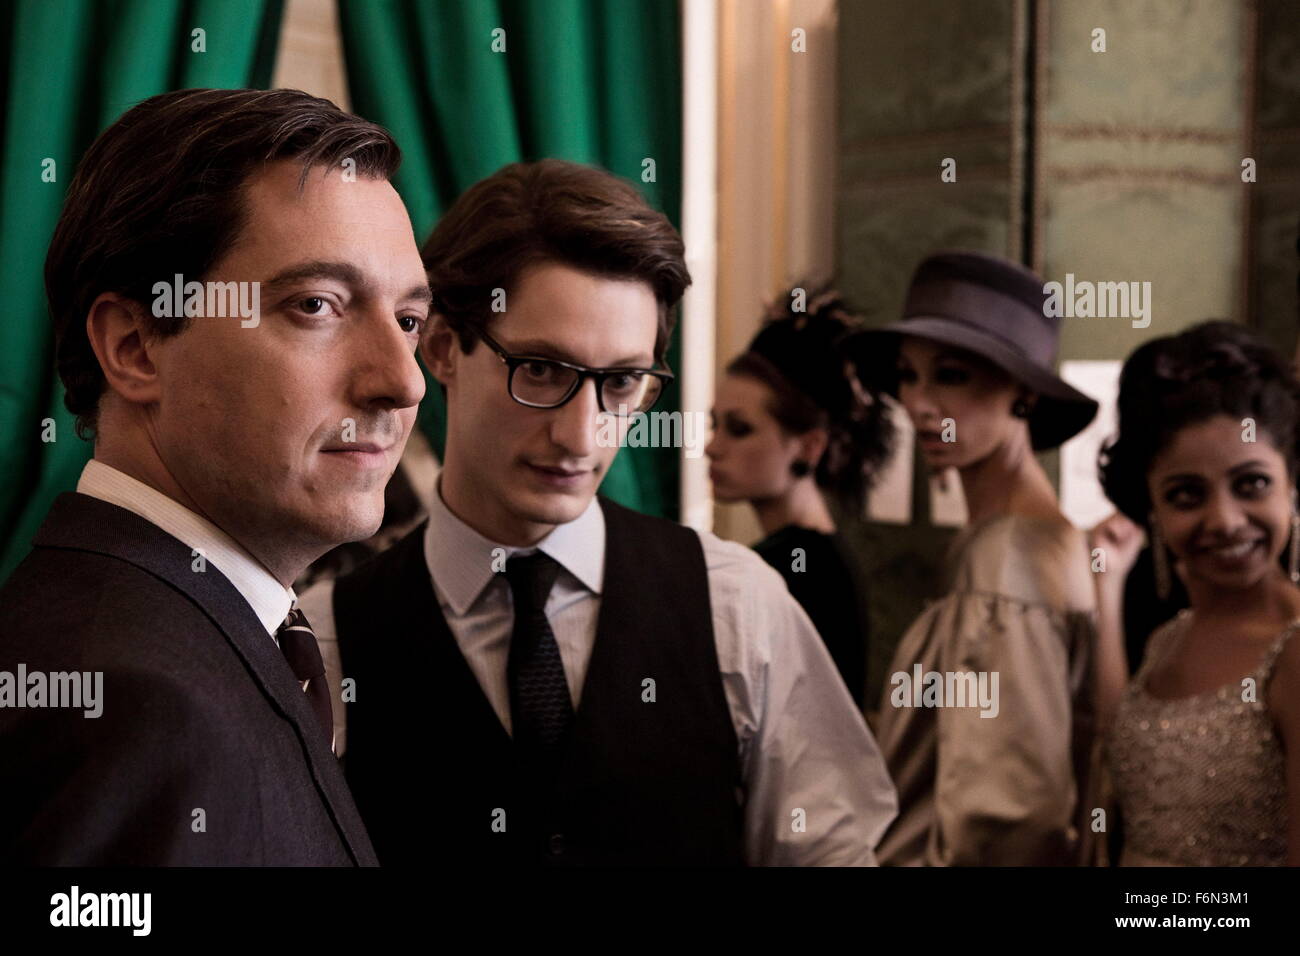 RELEASE DATE: July 9, 2014 TITLE: Yves Saint Laurent STUDIO: The Weinstein Company DIRECTOR: Jalil Lespert PLOT: A look at the life of French designer Yves Saint Laurent from the beginning of his career in 1958 when he met his lover and business partner, Pierre Berge PICTURED: Guillaume Gallienne as Pierre Berge and Pierre Niney as Yves Saint Laurent (Credit: c The Weinstein Company/Entertainment Pictures) Stock Photo